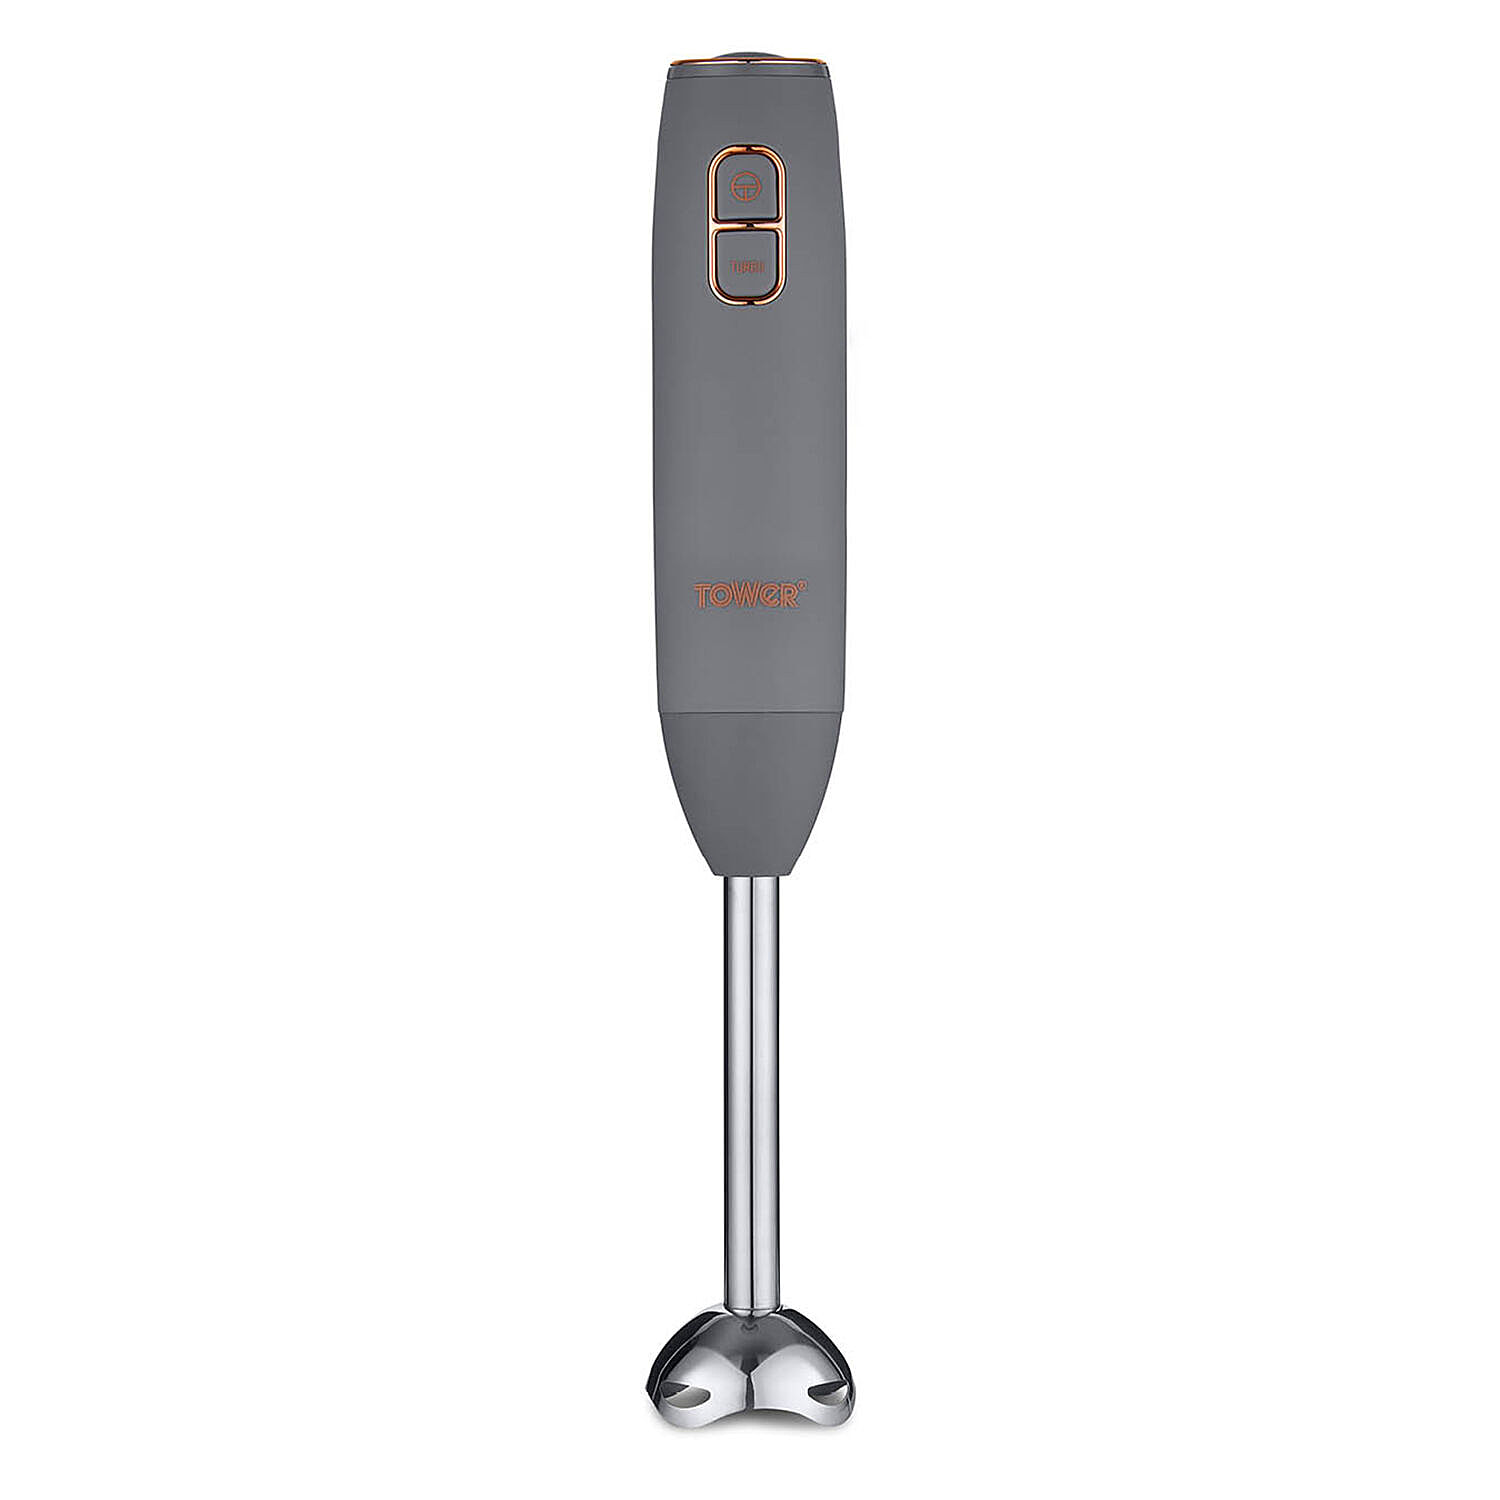 Tower Cavaletto 600W Hand Blender - Grey and Rose Gold